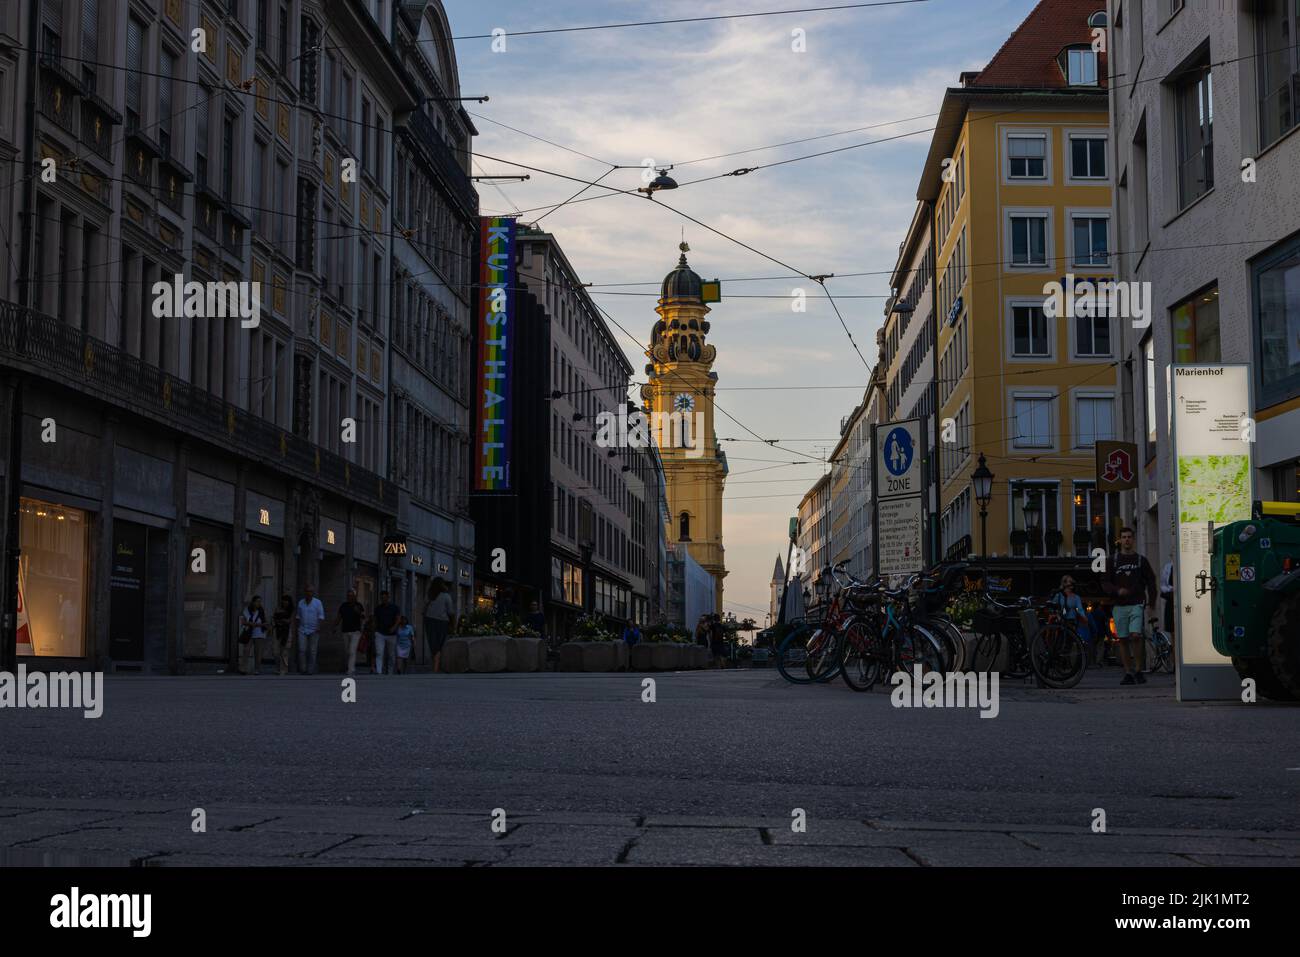 Munich, Germany - July 6, 2022: Low angle street view of Theatinerstrasse overlooking Theatinerkirche at sunset. The church tower or bell tower with i Stock Photo